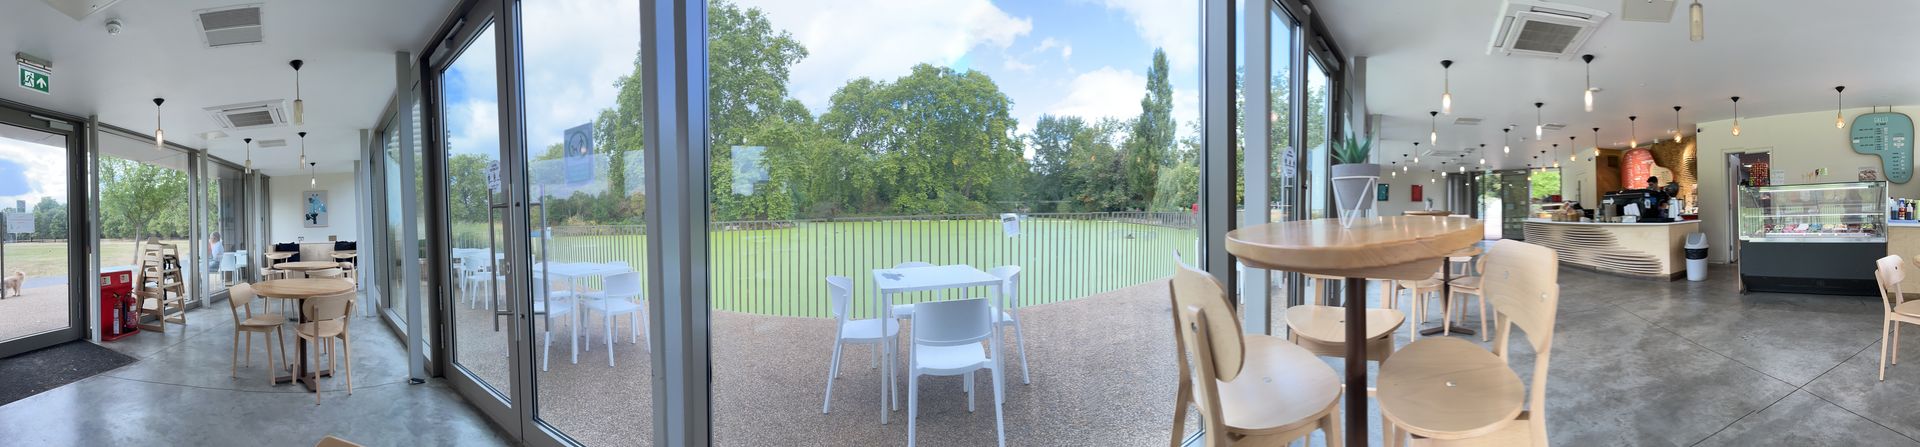 Panorama of a cafe, with glass windows to a lake covered in green algea with trees behind. To the left side is more cafe, with a glass window to a park outside and a small dog. The tables and chairs are wood, bright and clean.